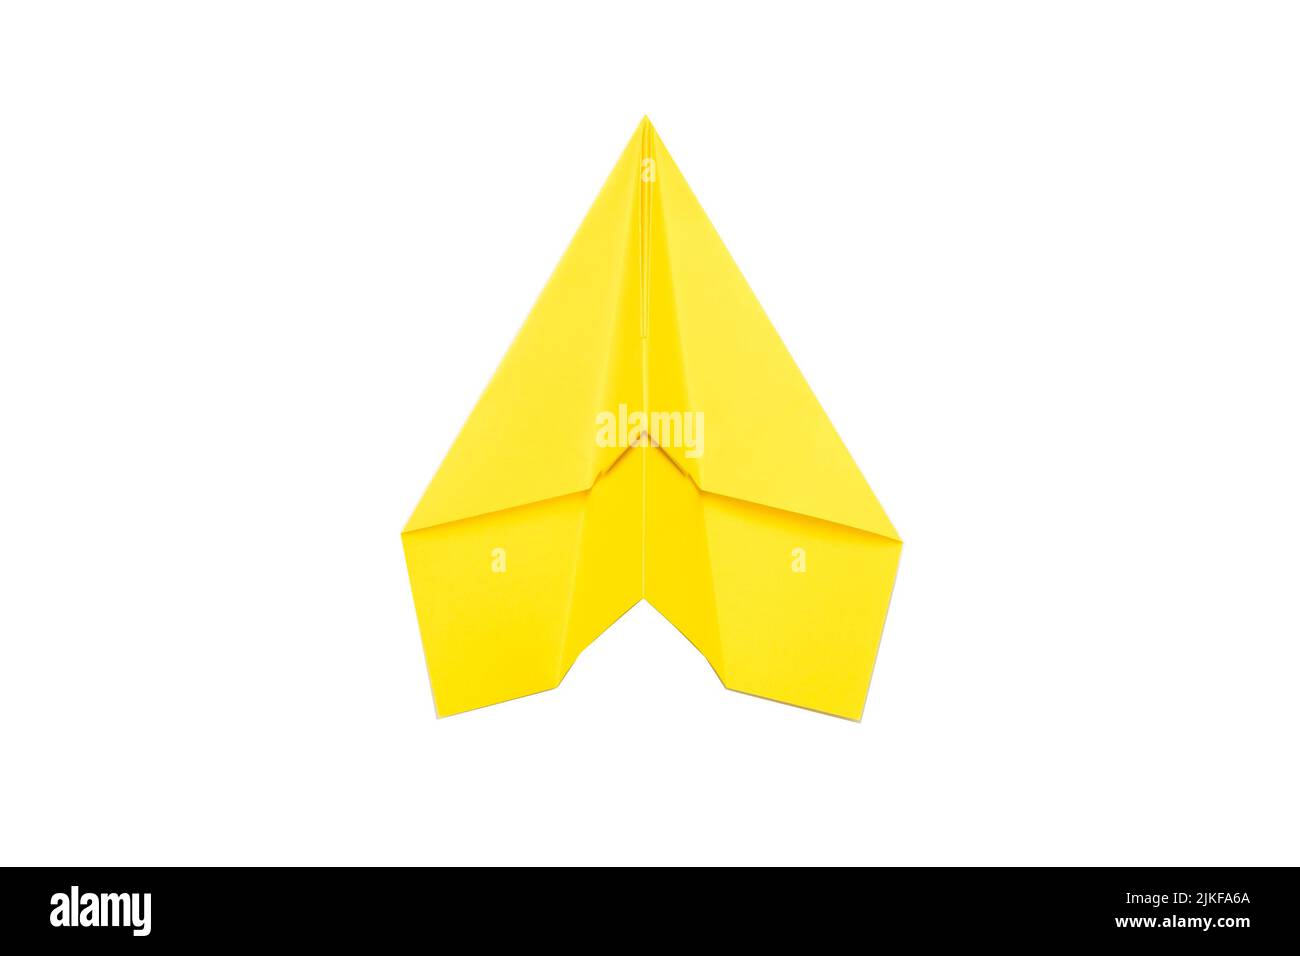 personal growth ambition yellow paper airplane Stock Photo